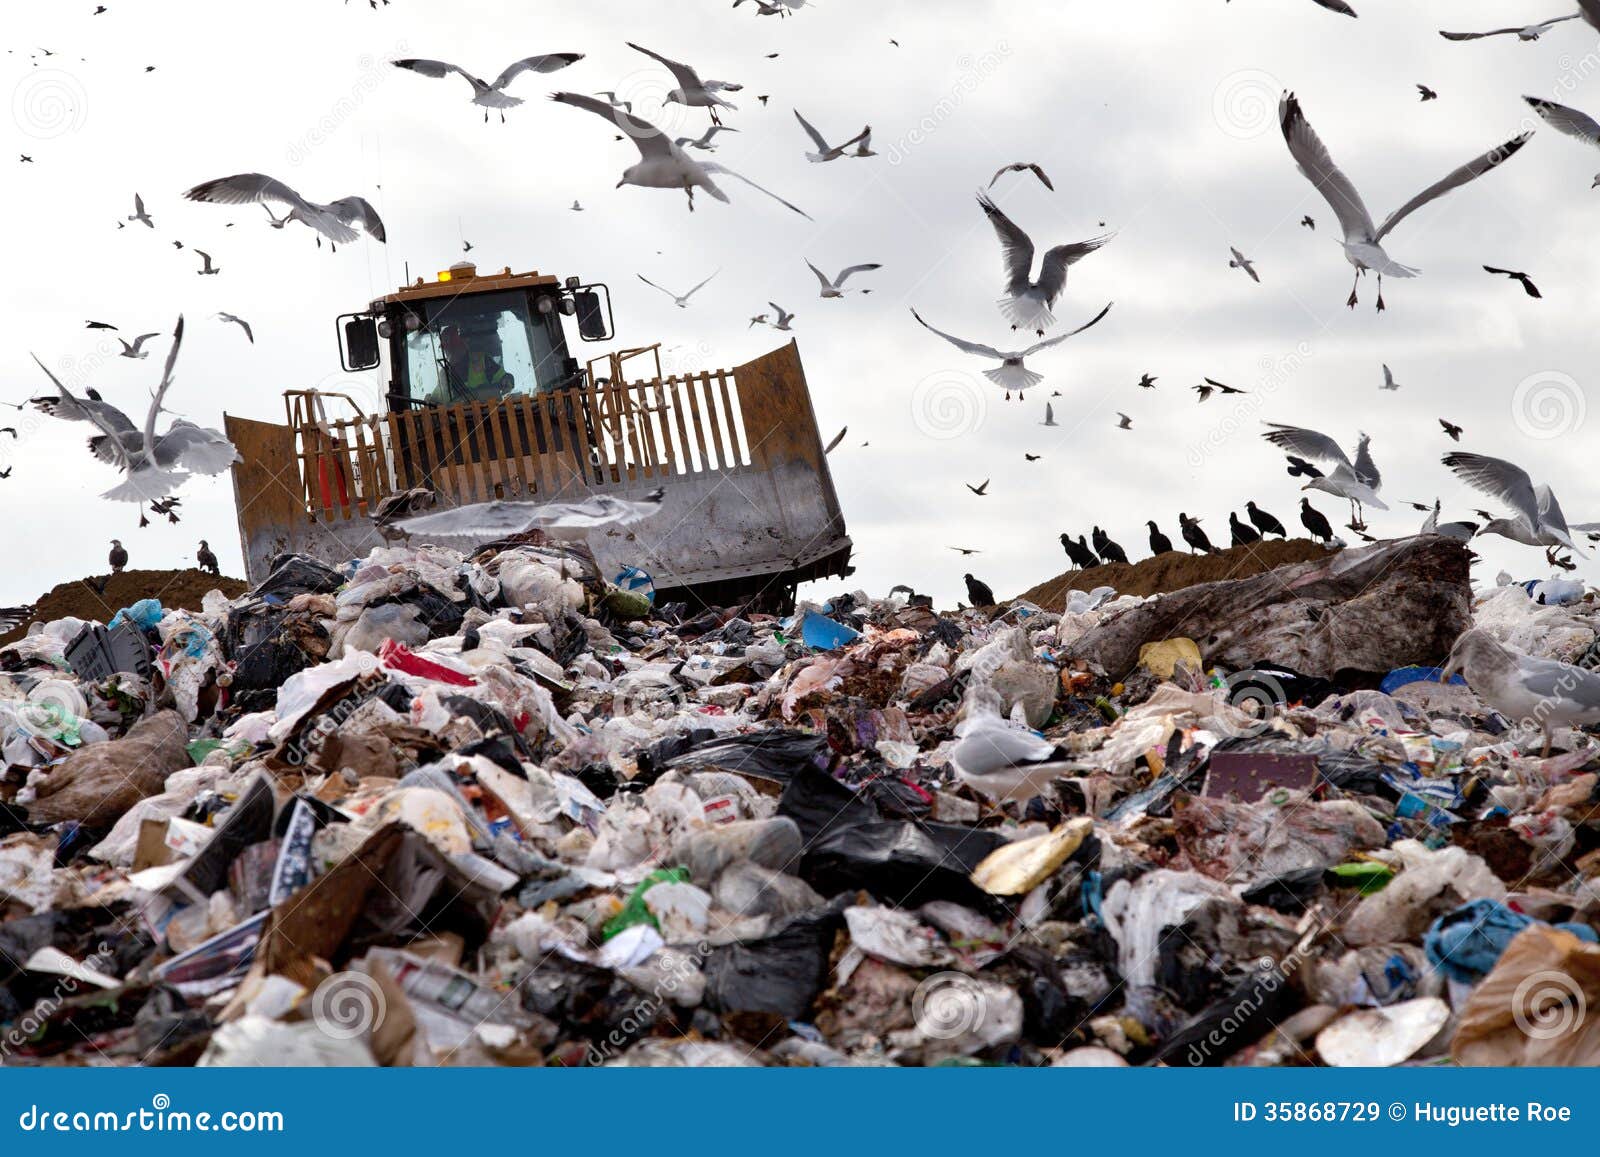 landfill with birds